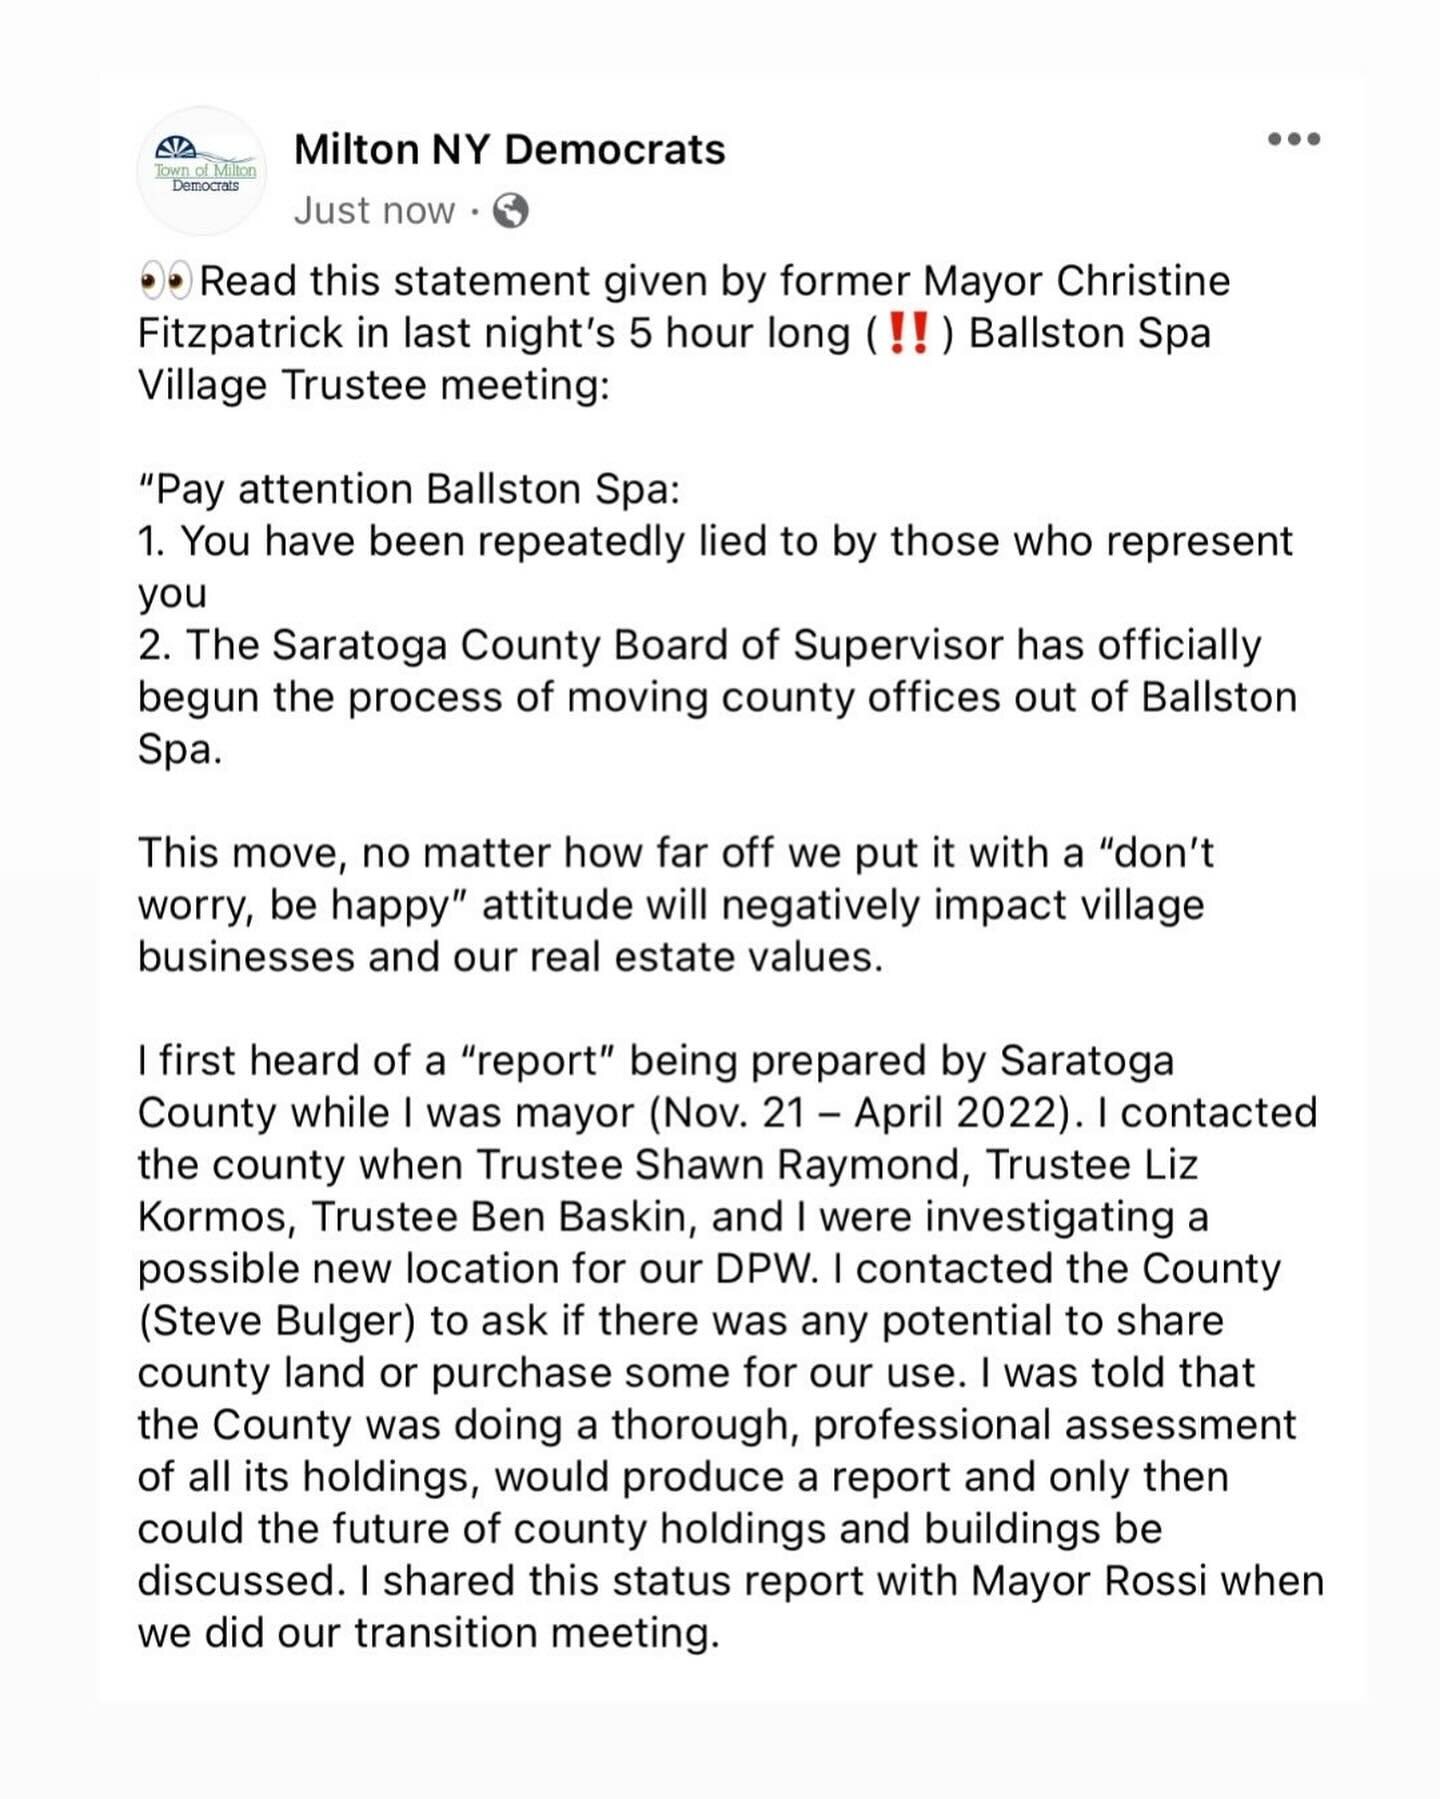 👀Read this statement given by former Mayor Christine Fitzpatrick in last night&rsquo;s 5 hour long (‼️) Ballston Spa Village Trustee meeting:

&ldquo;Pay attention Ballston Spa:
1. You have been repeatedly lied to by those who represent you
2. The S